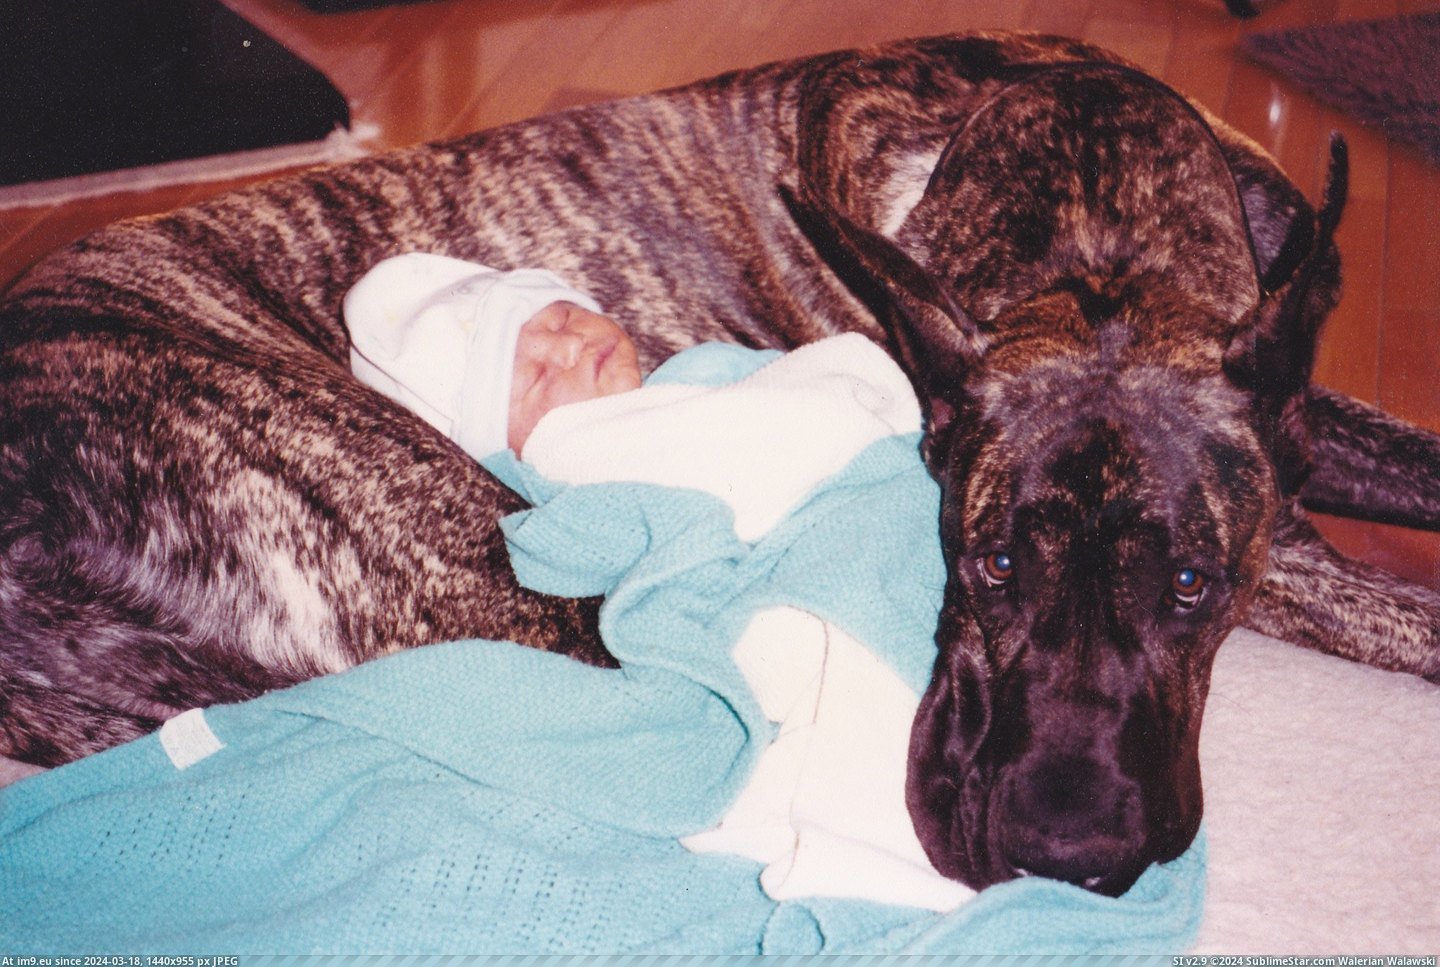 #Was #Great #Did #Dane #Introduce #Parents #Brought #Hospital [Pics] When my parents brought me home from the hospital, the first thing they did was introduce me to our Great Dane. He was a  Pic. (Изображение из альбом My r/PICS favs))